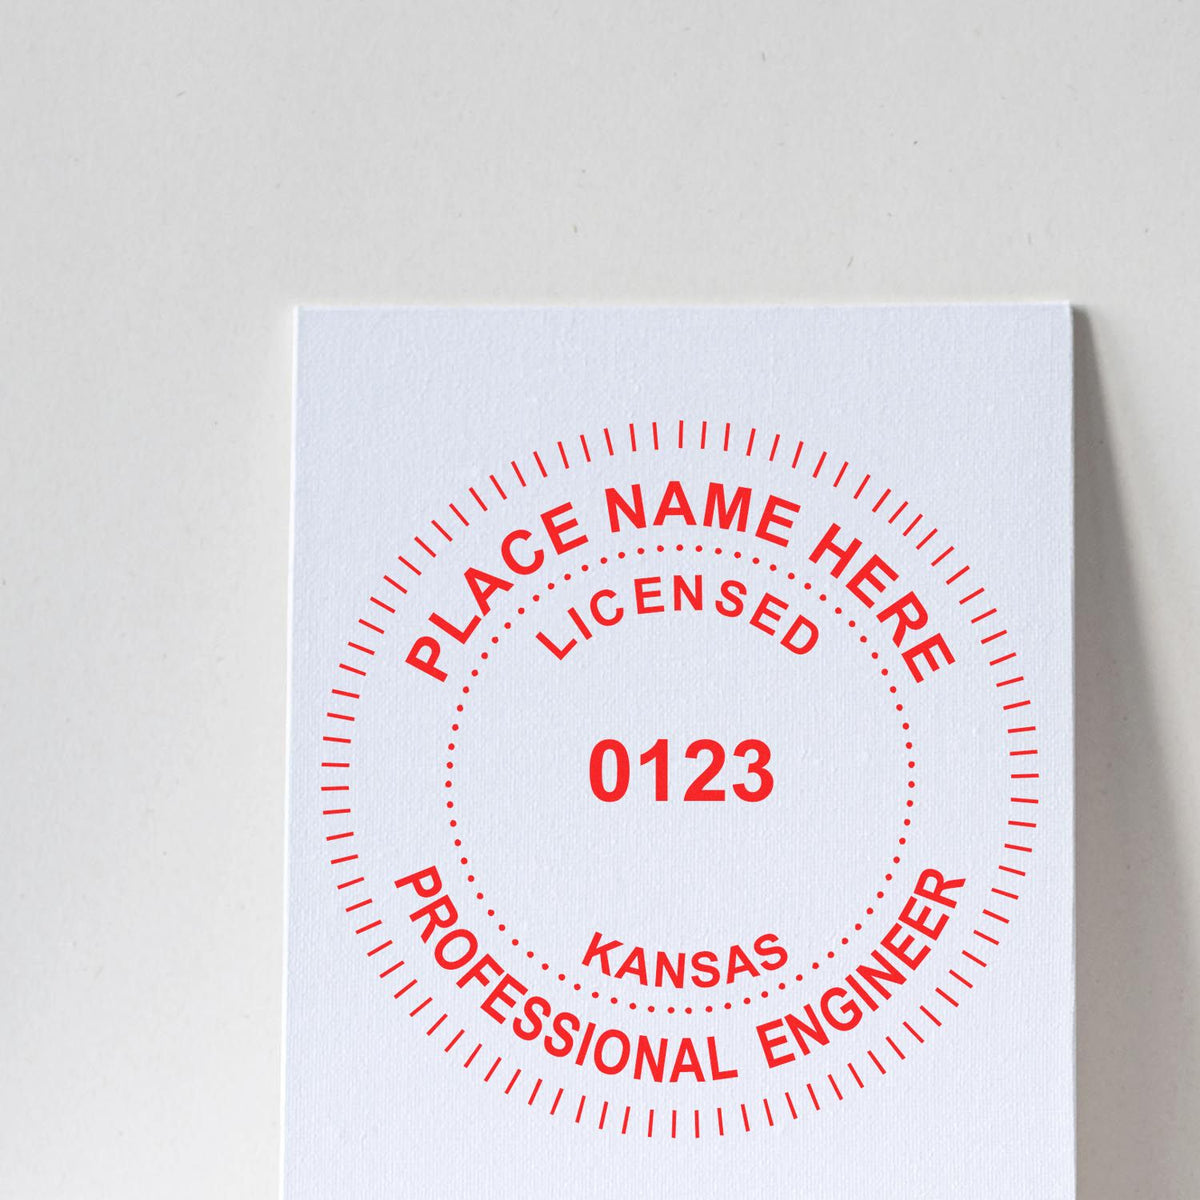 A photograph of the Slim Pre-Inked Kansas Professional Engineer Seal Stamp stamp impression reveals a vivid, professional image of the on paper.